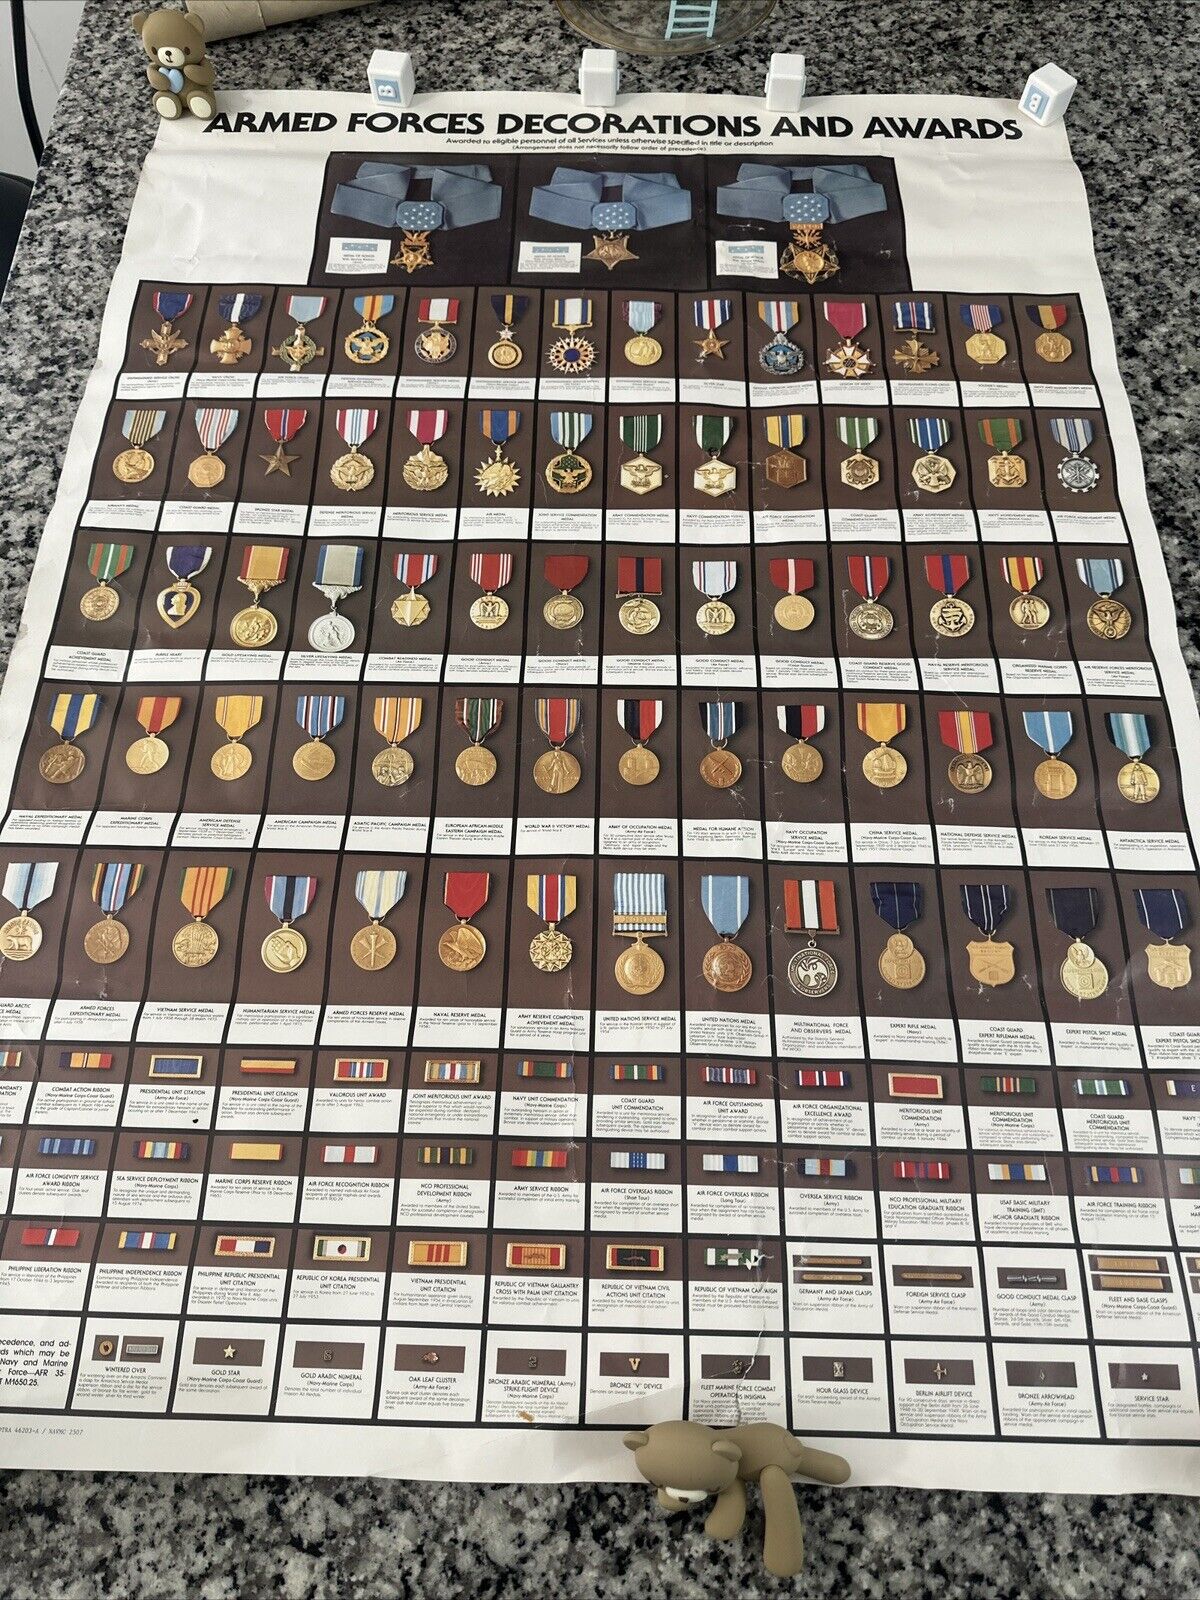 Military - Armed Forces Decorations and Awards - Large poster